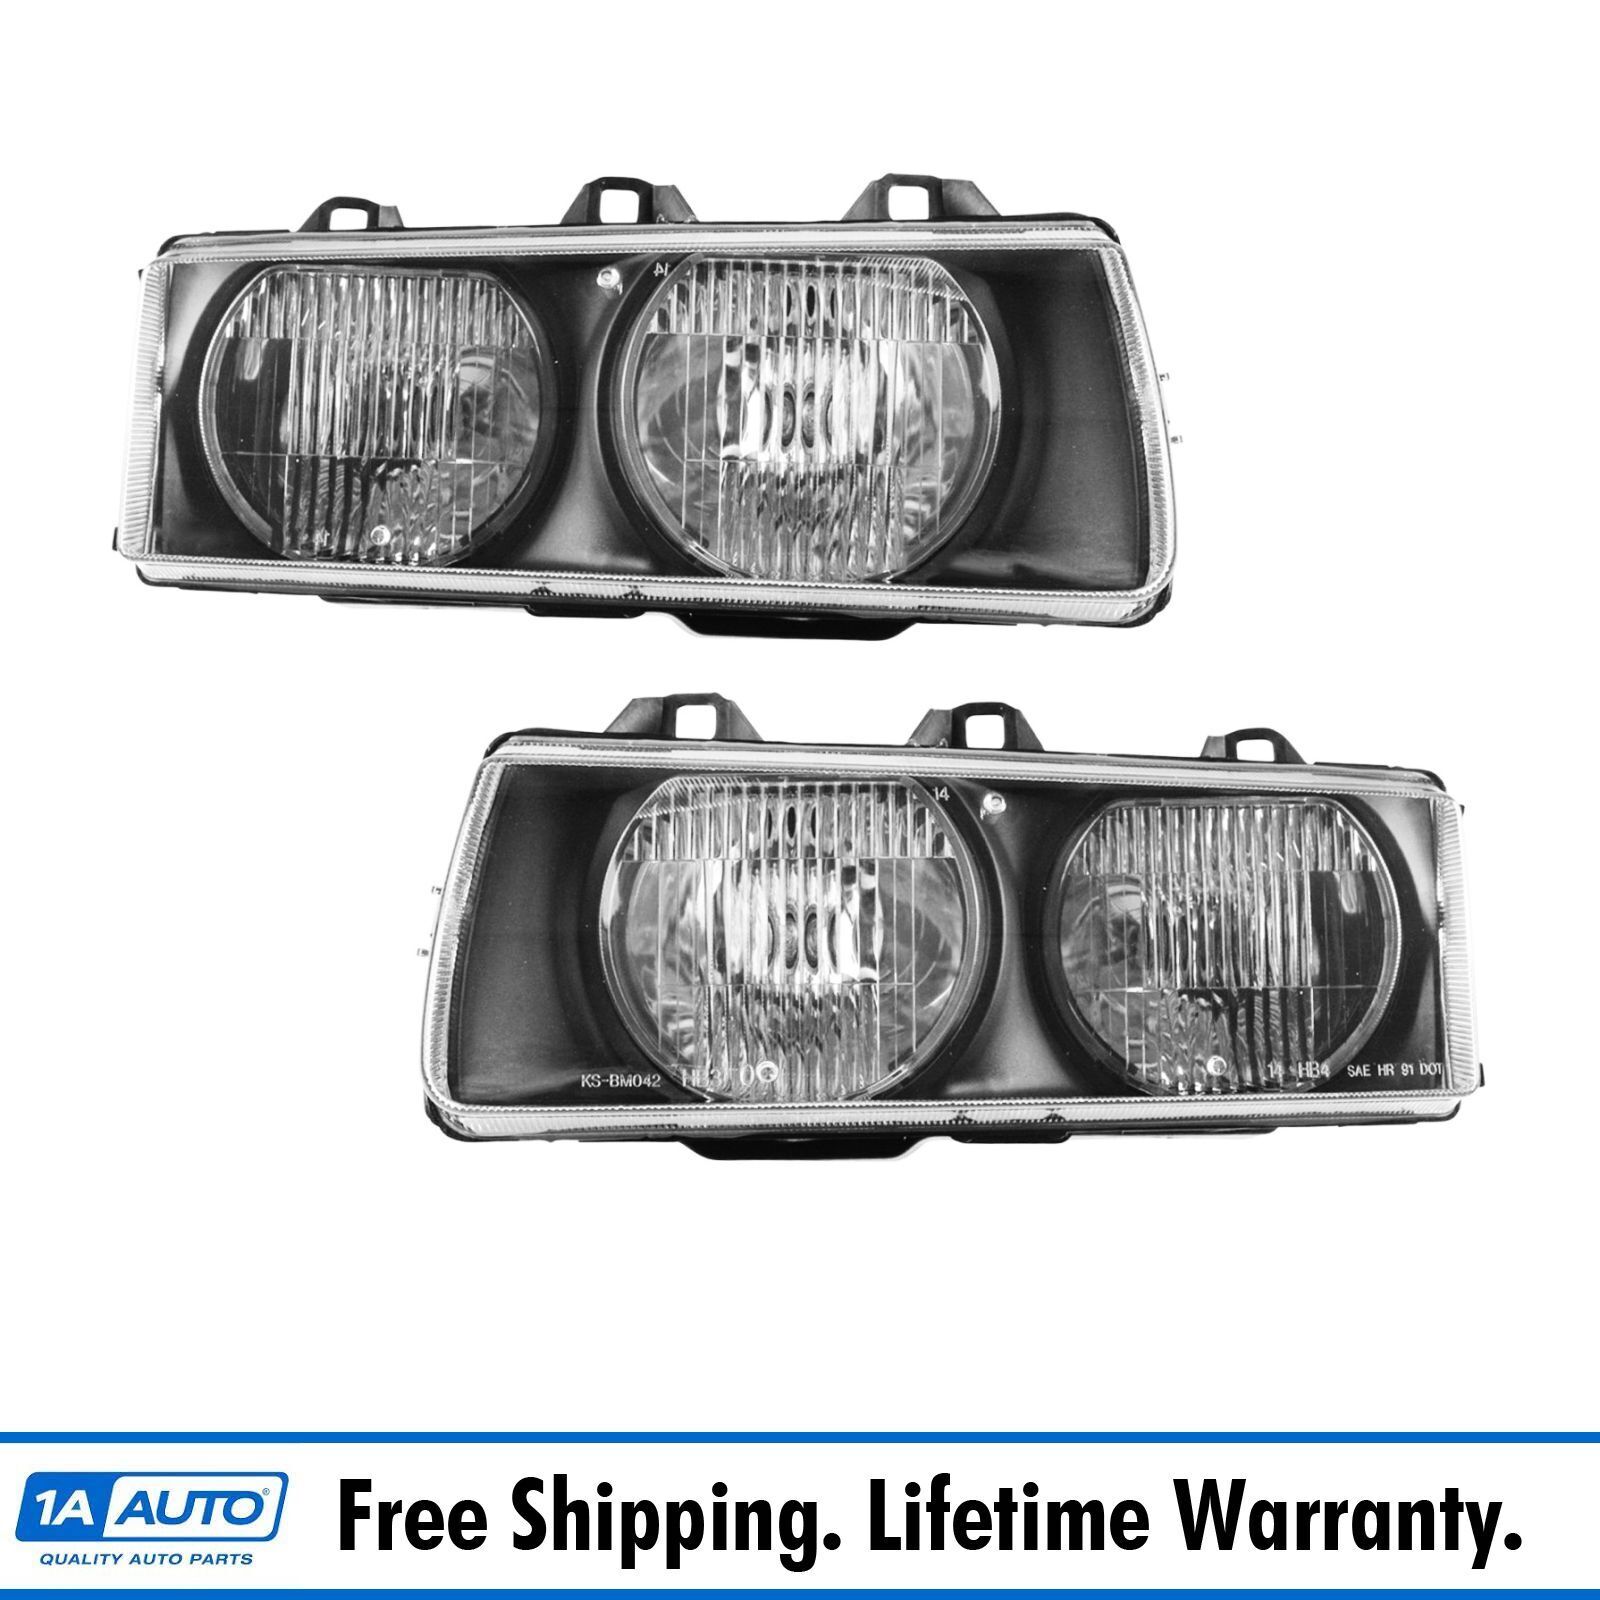 Headlights Headlamps Left & Right Pair Set of 2 for 92-99 BMW E36 3 Series